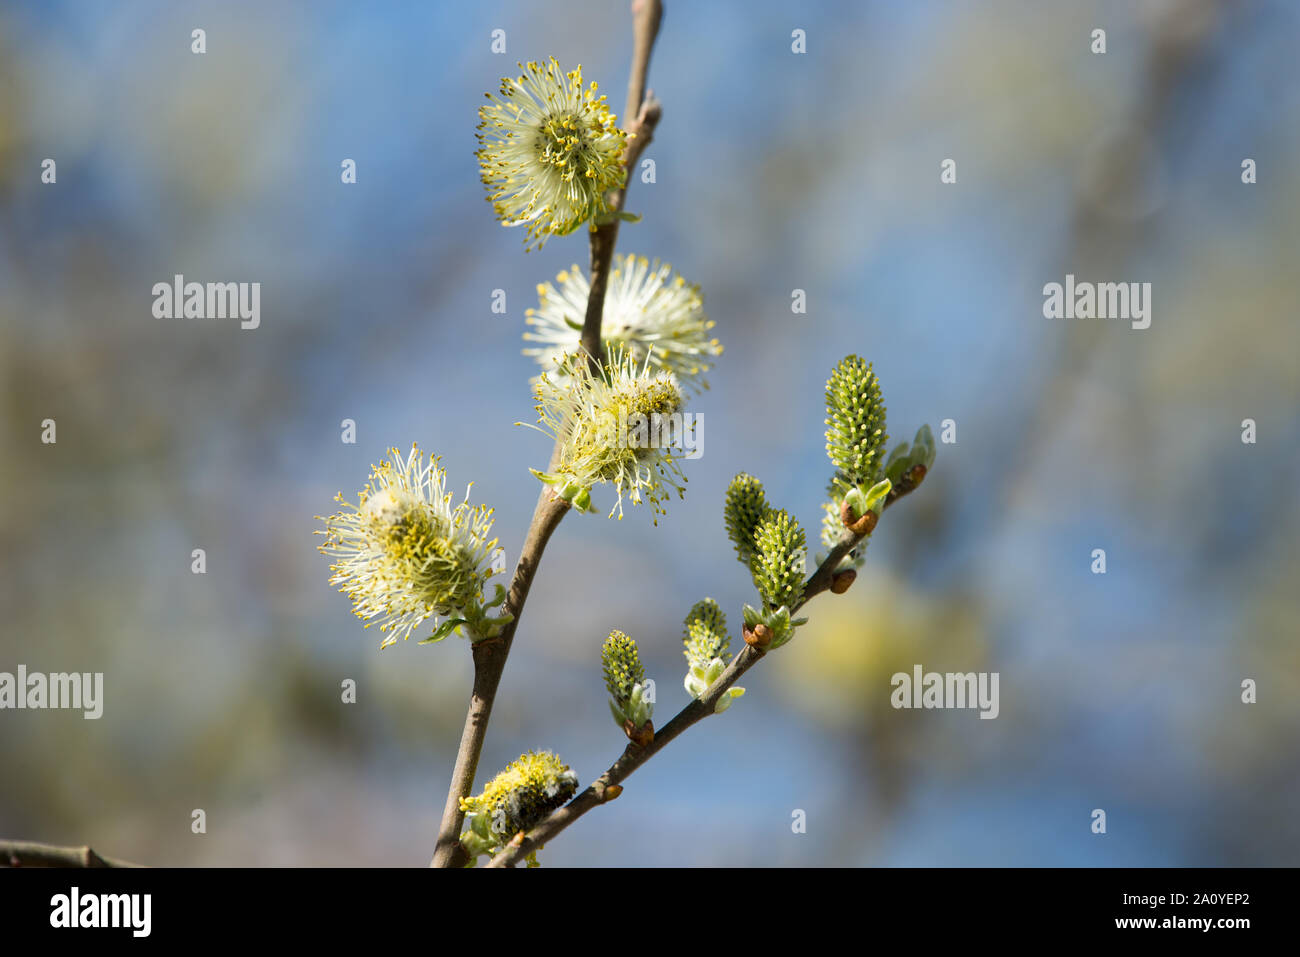 Catkin or ament is a slim, cylindrical flower cluster from a salix tree Stock Photo